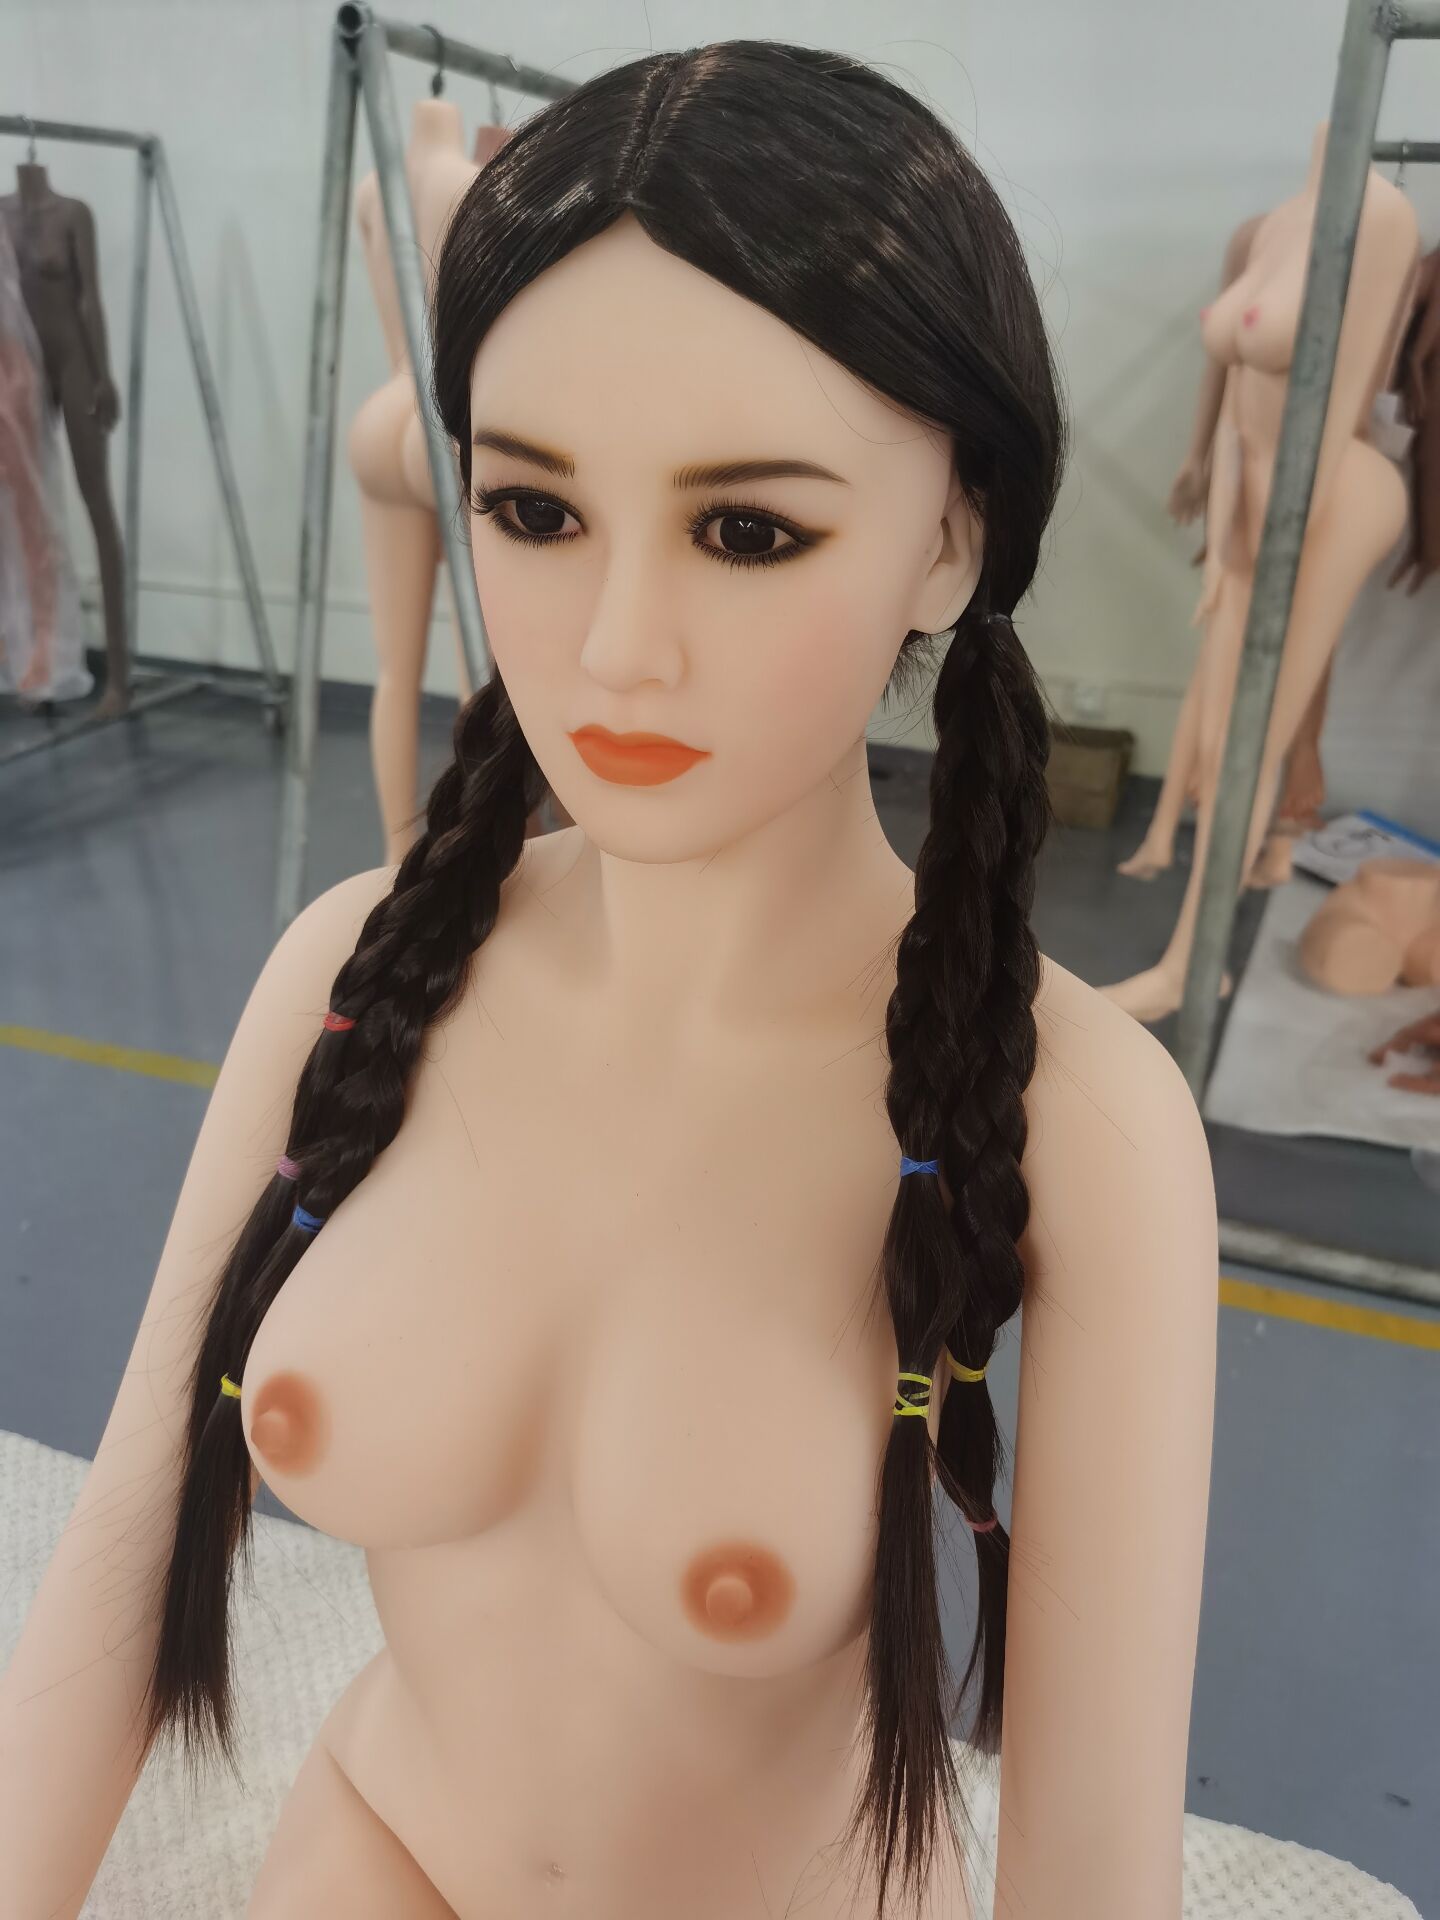 US Stock - Noa 160cm 210# Head Asia Small Breasts Adult Love Doll TPE Sex Doll